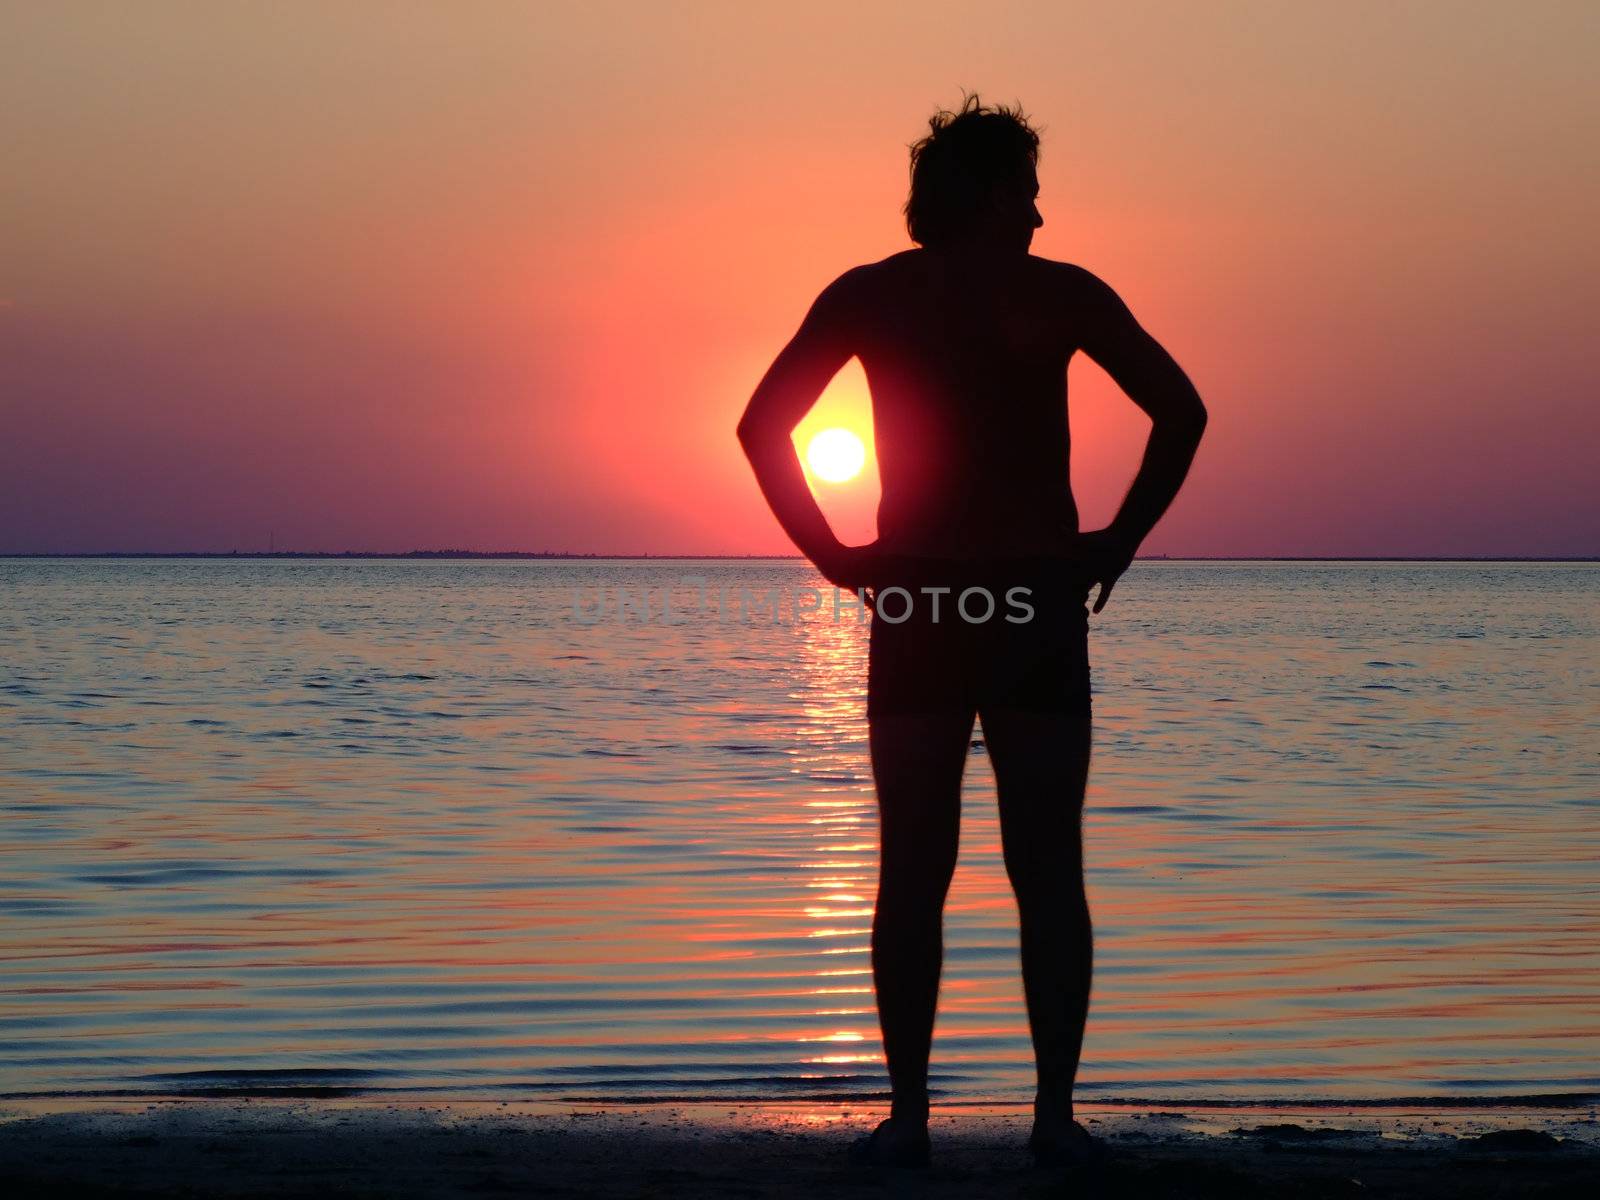 A black silhouette of a young guy on a sunset 1 by acidgrey